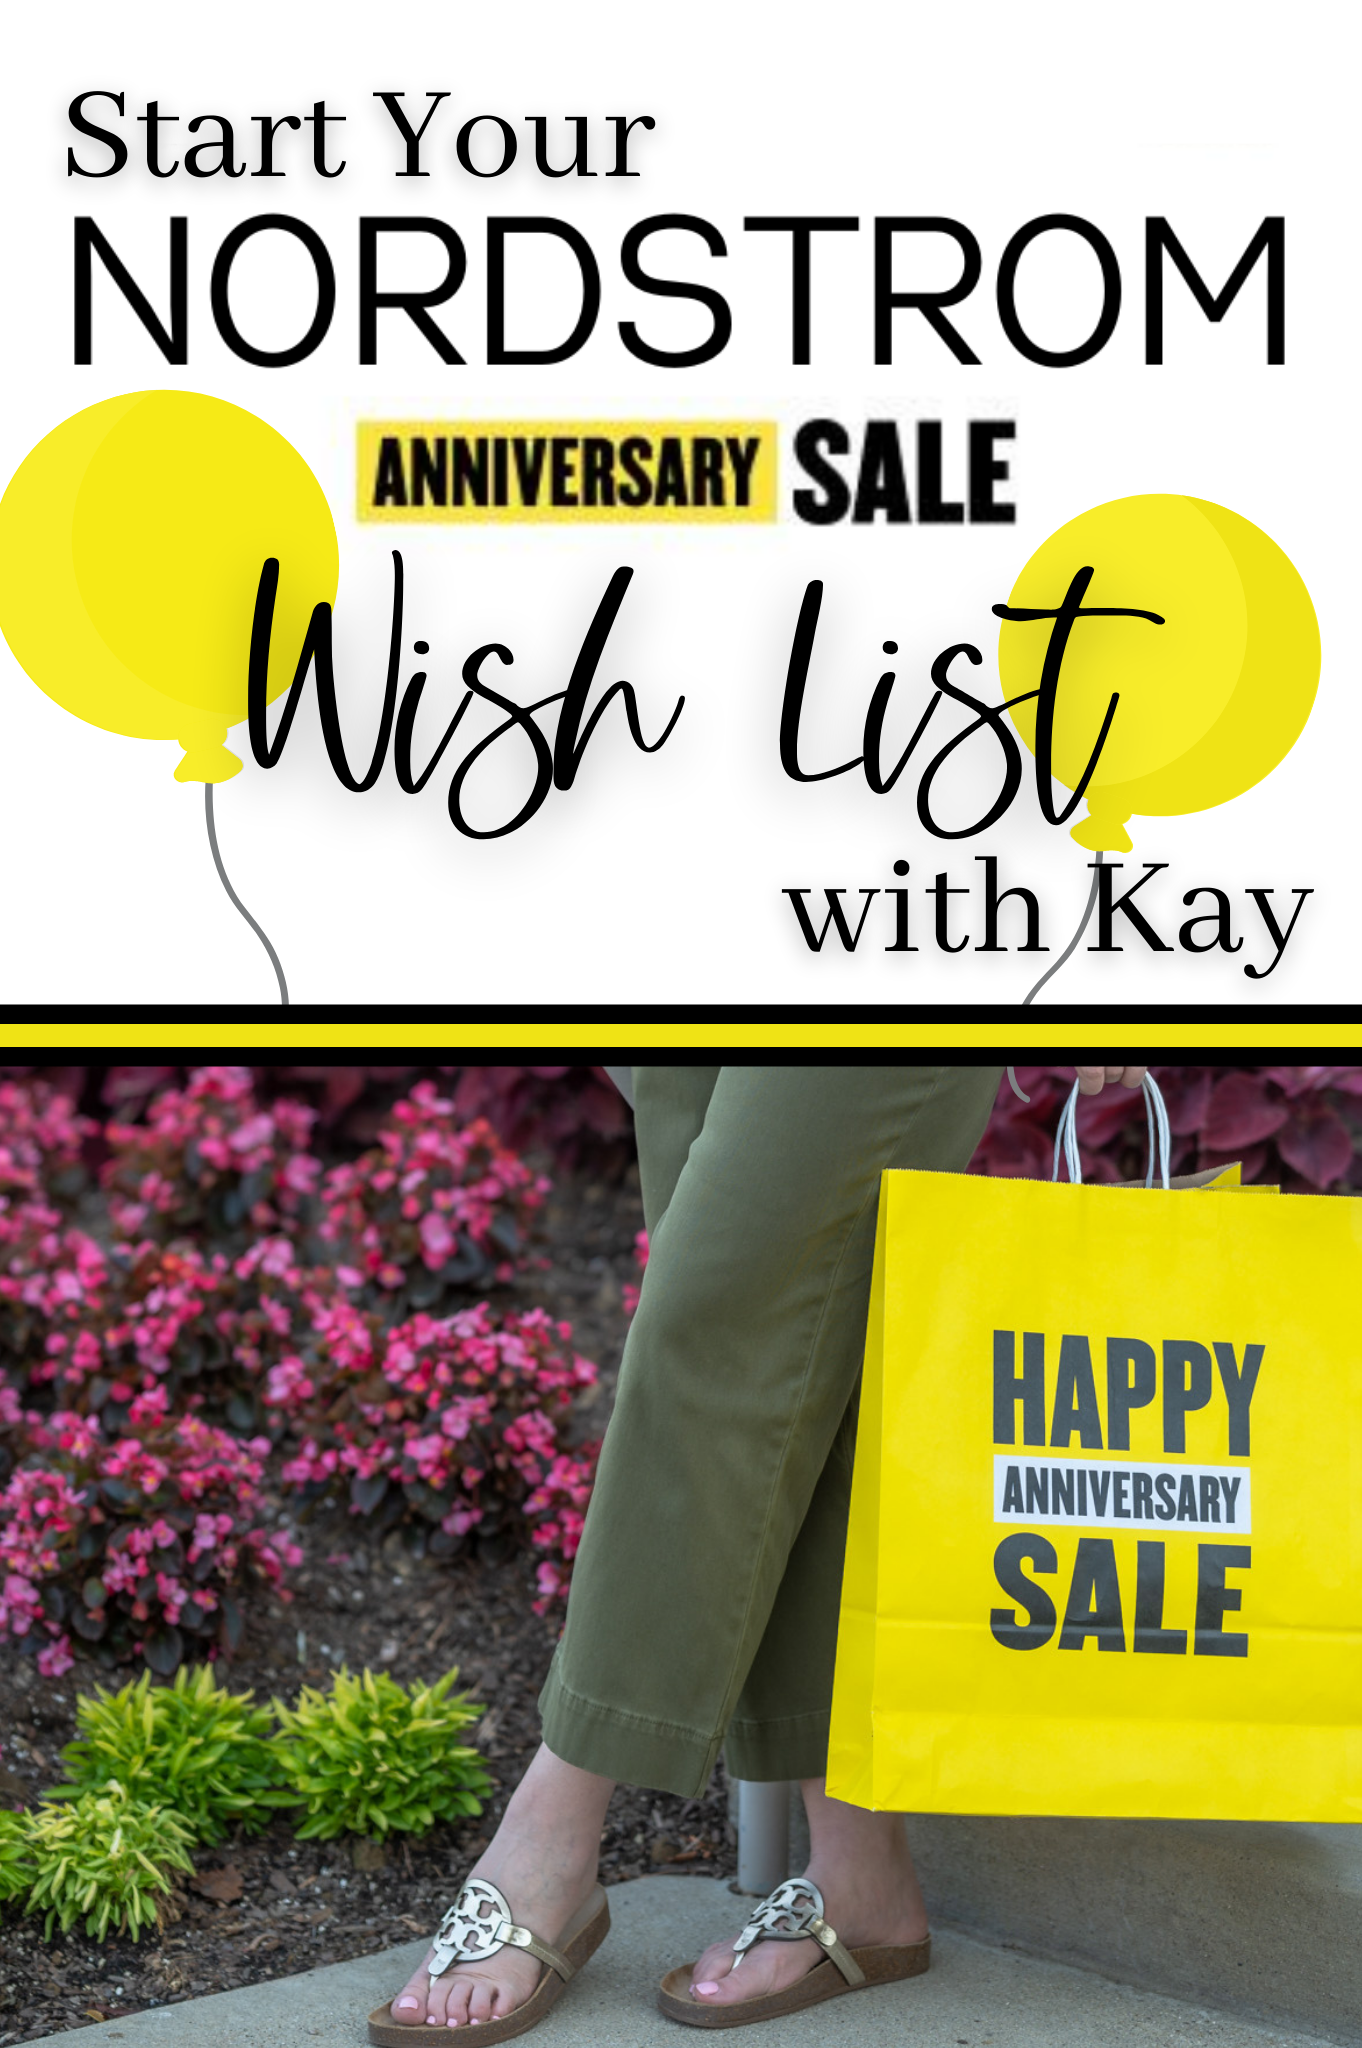 Start Your Nordstrom Anniversary Sale Wish List with Kay